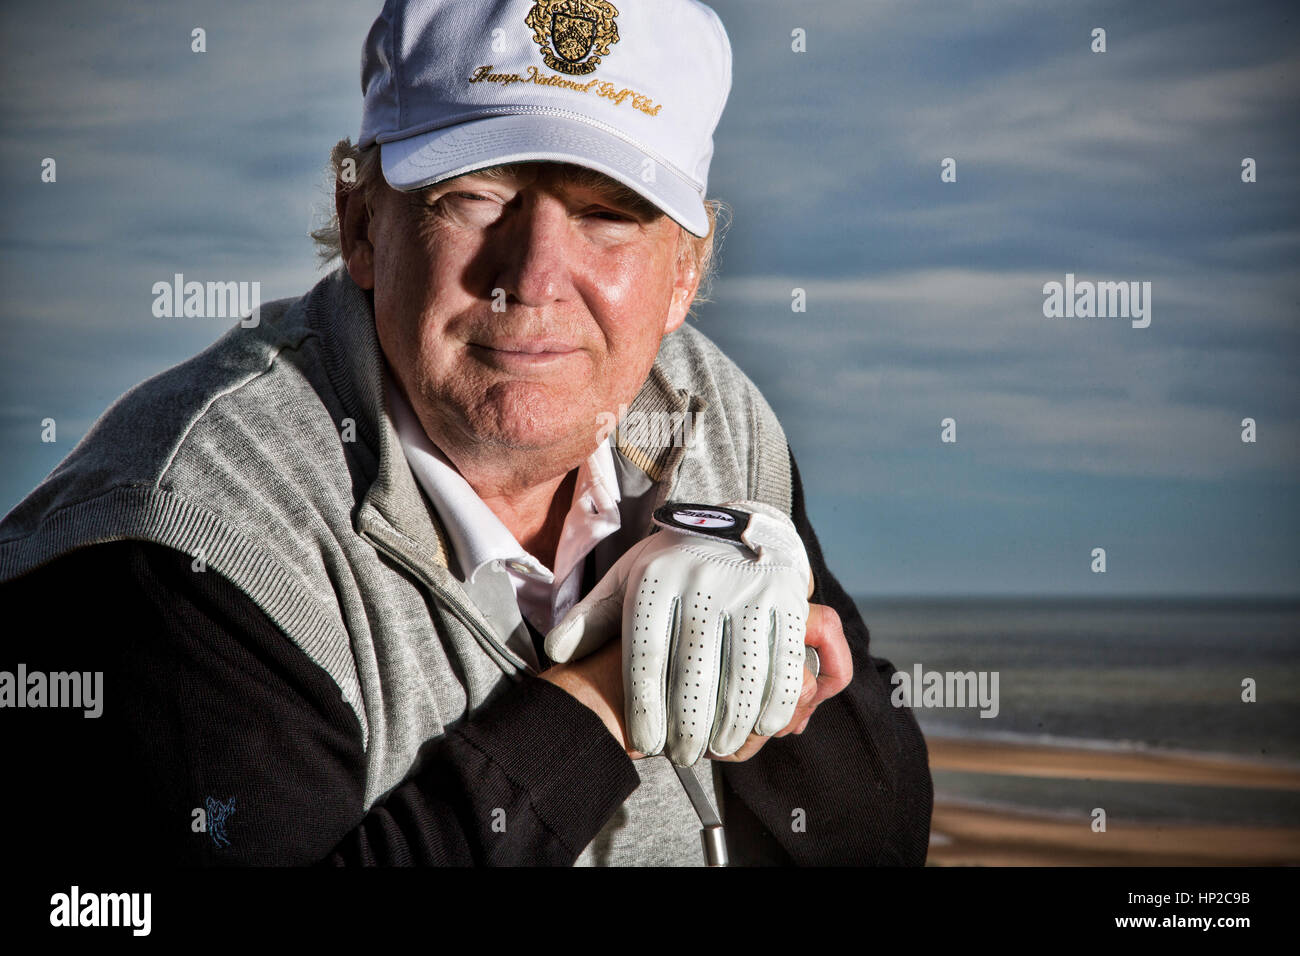 Anti trump hat hi-res stock photography and images - Alamy